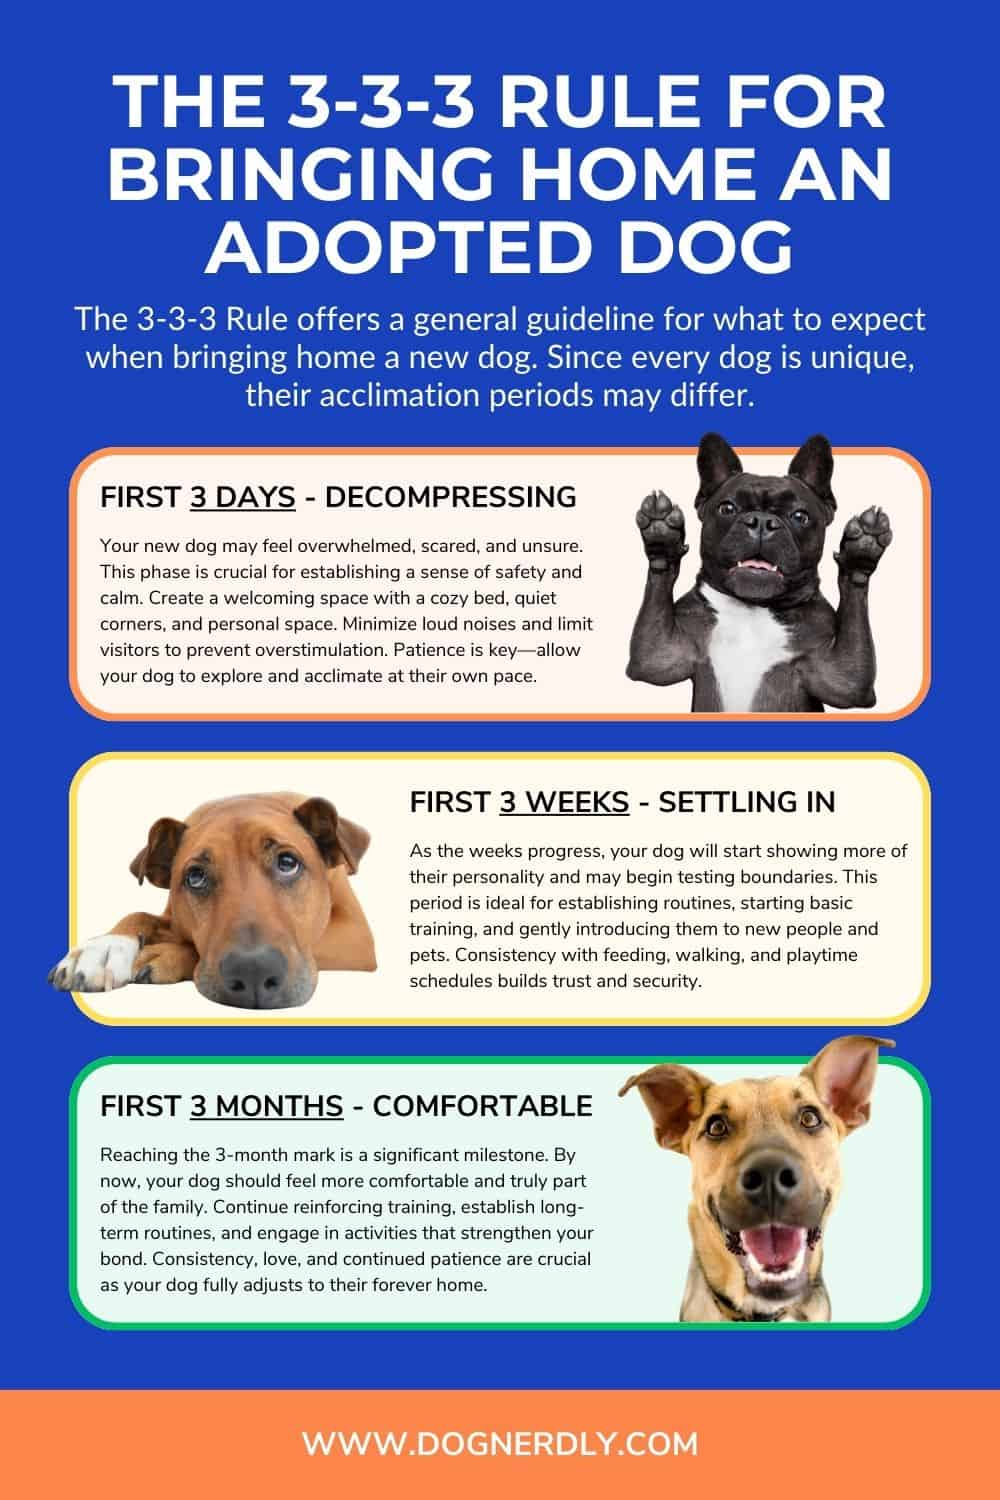 The 3-3-3 Rule For Adopting a Dog Infographic by DogNerdly